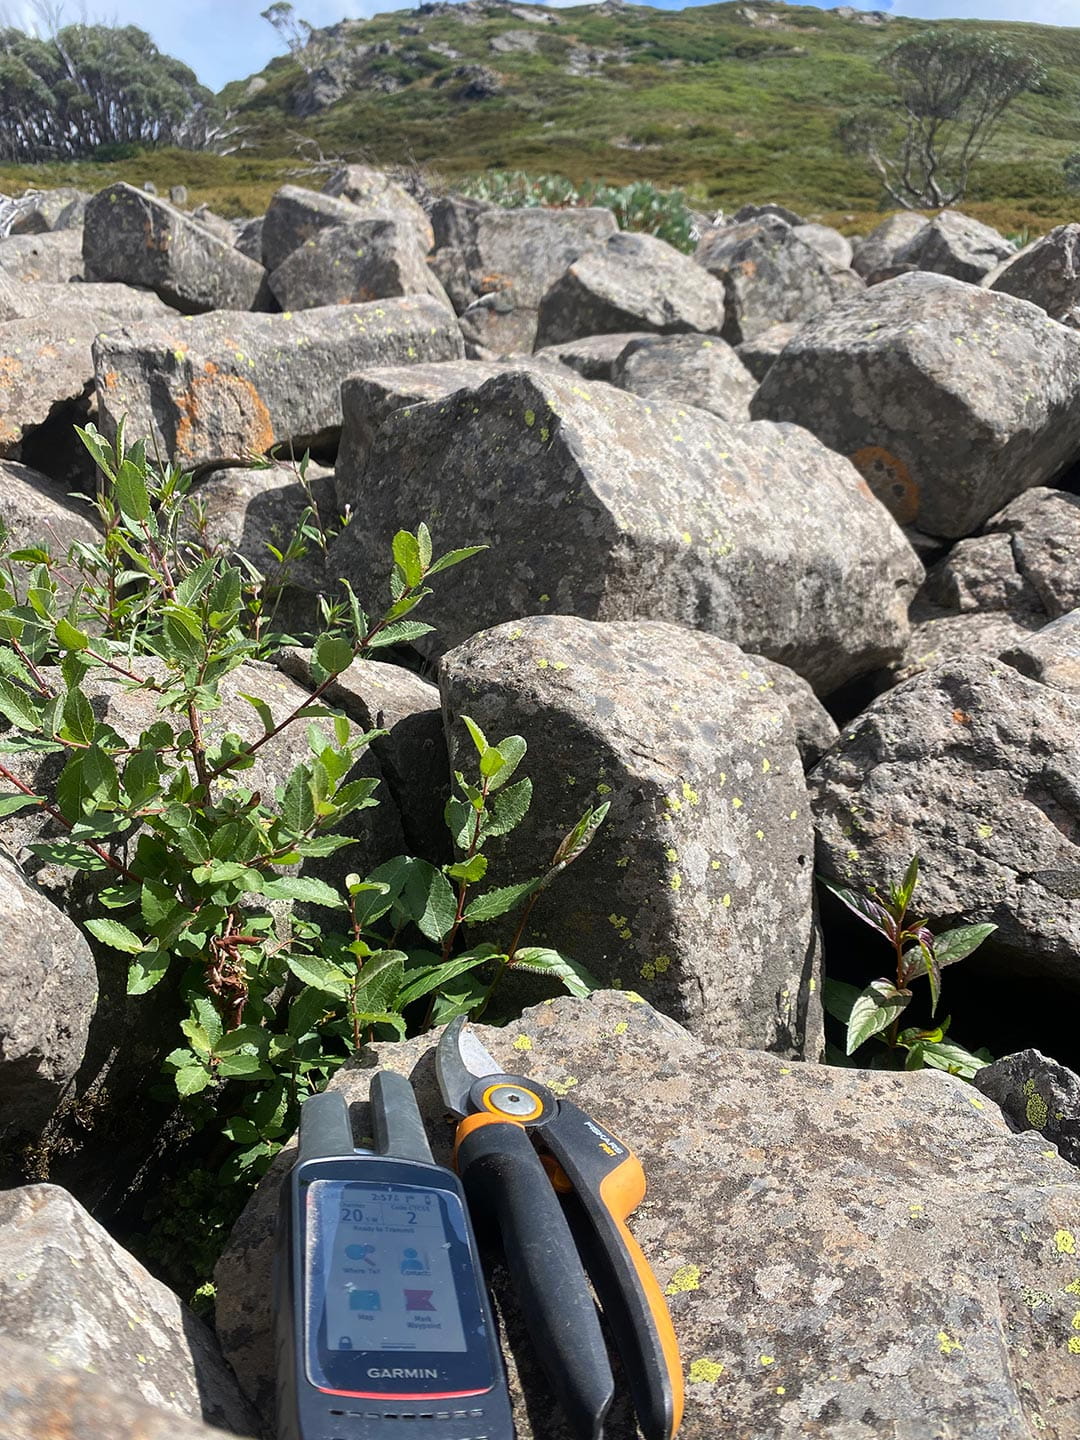 A Garmin GPS device and a pair of secateurs resting on a rock next to willow sprouting between boulders.